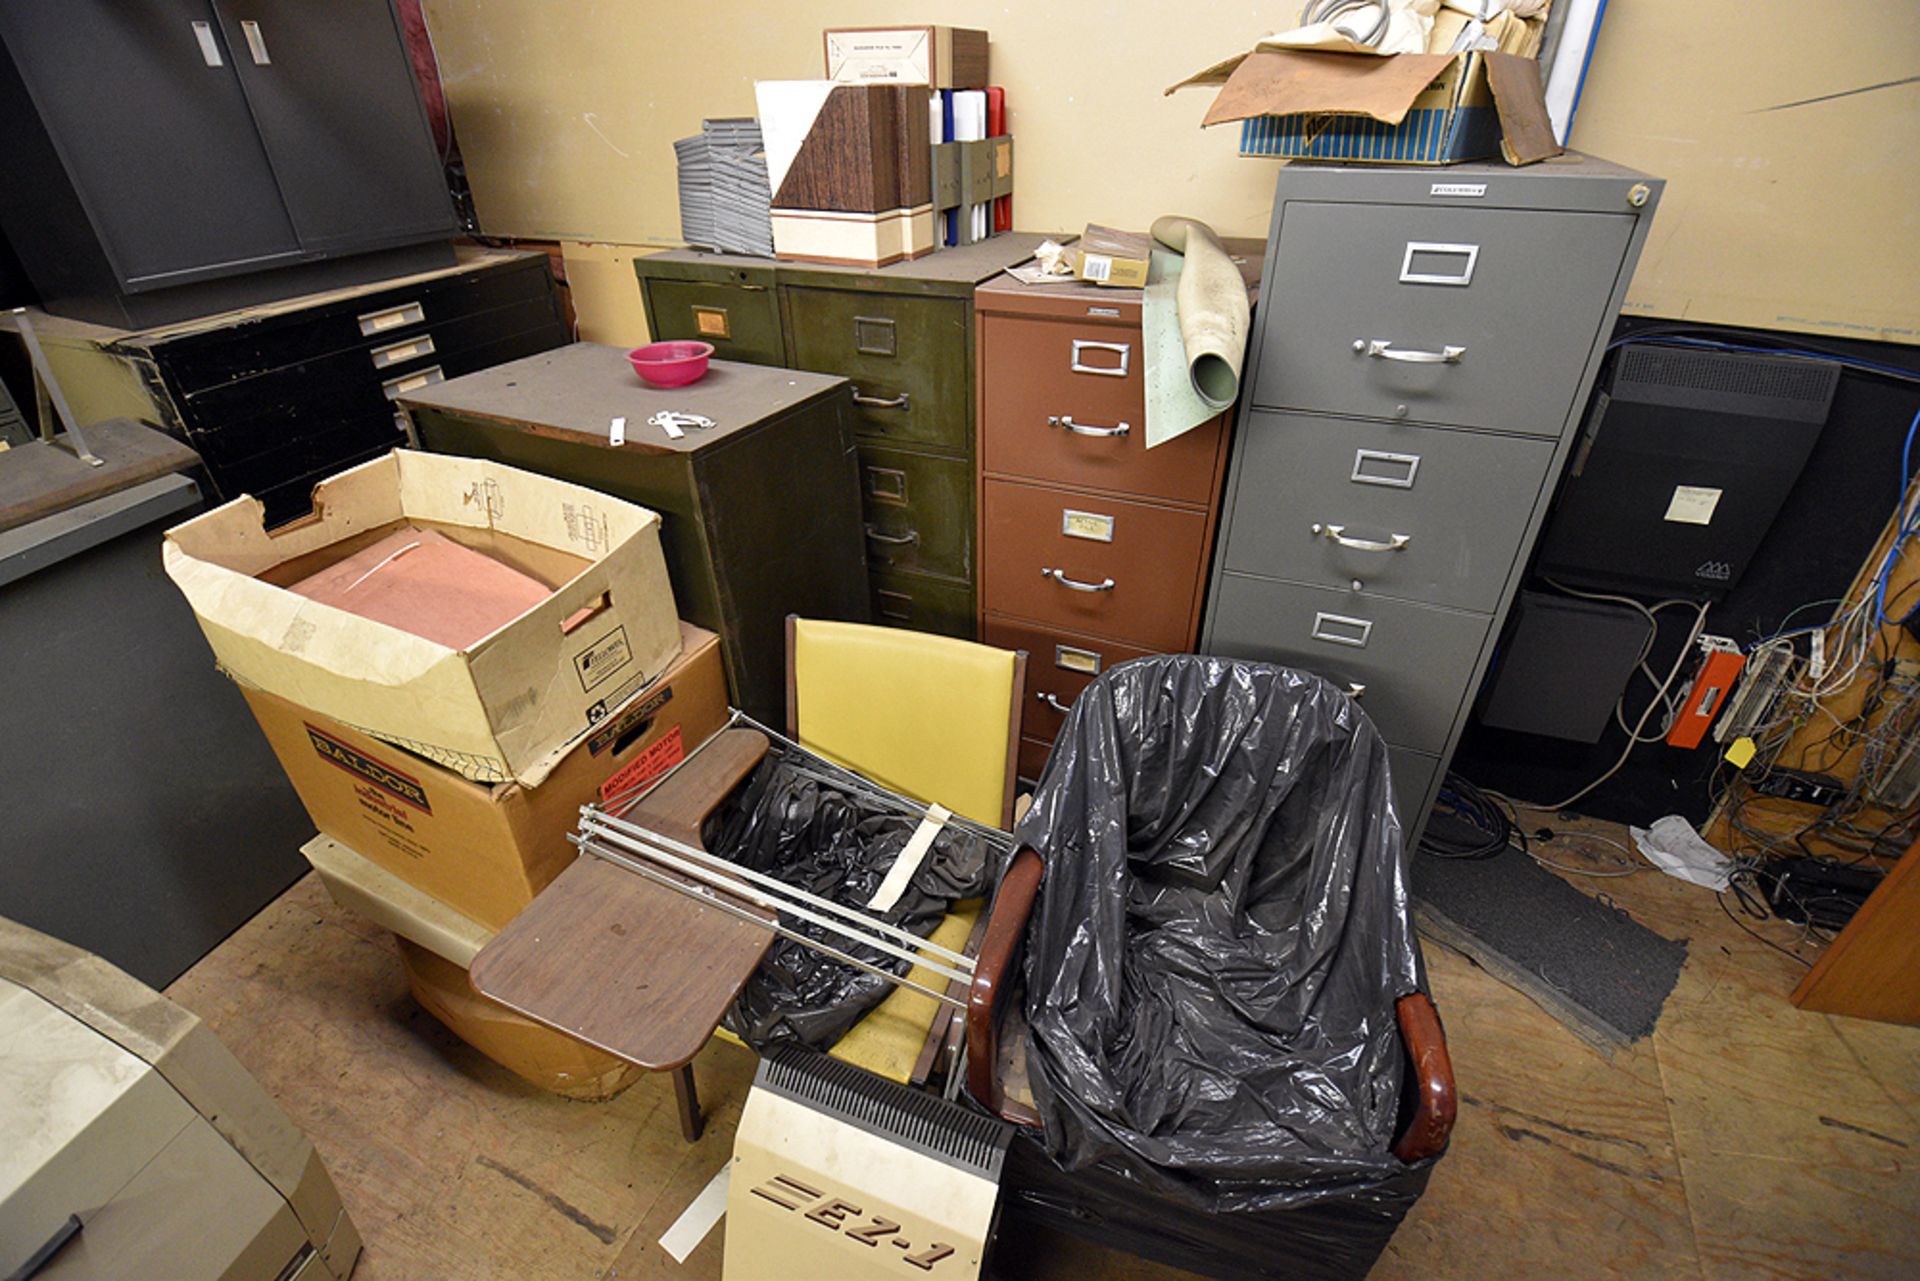 Furniture Throughout Room: File Cabinets, Sofa, Flat Files & Electronics (NO CAMERA EQUIP) - Image 5 of 10